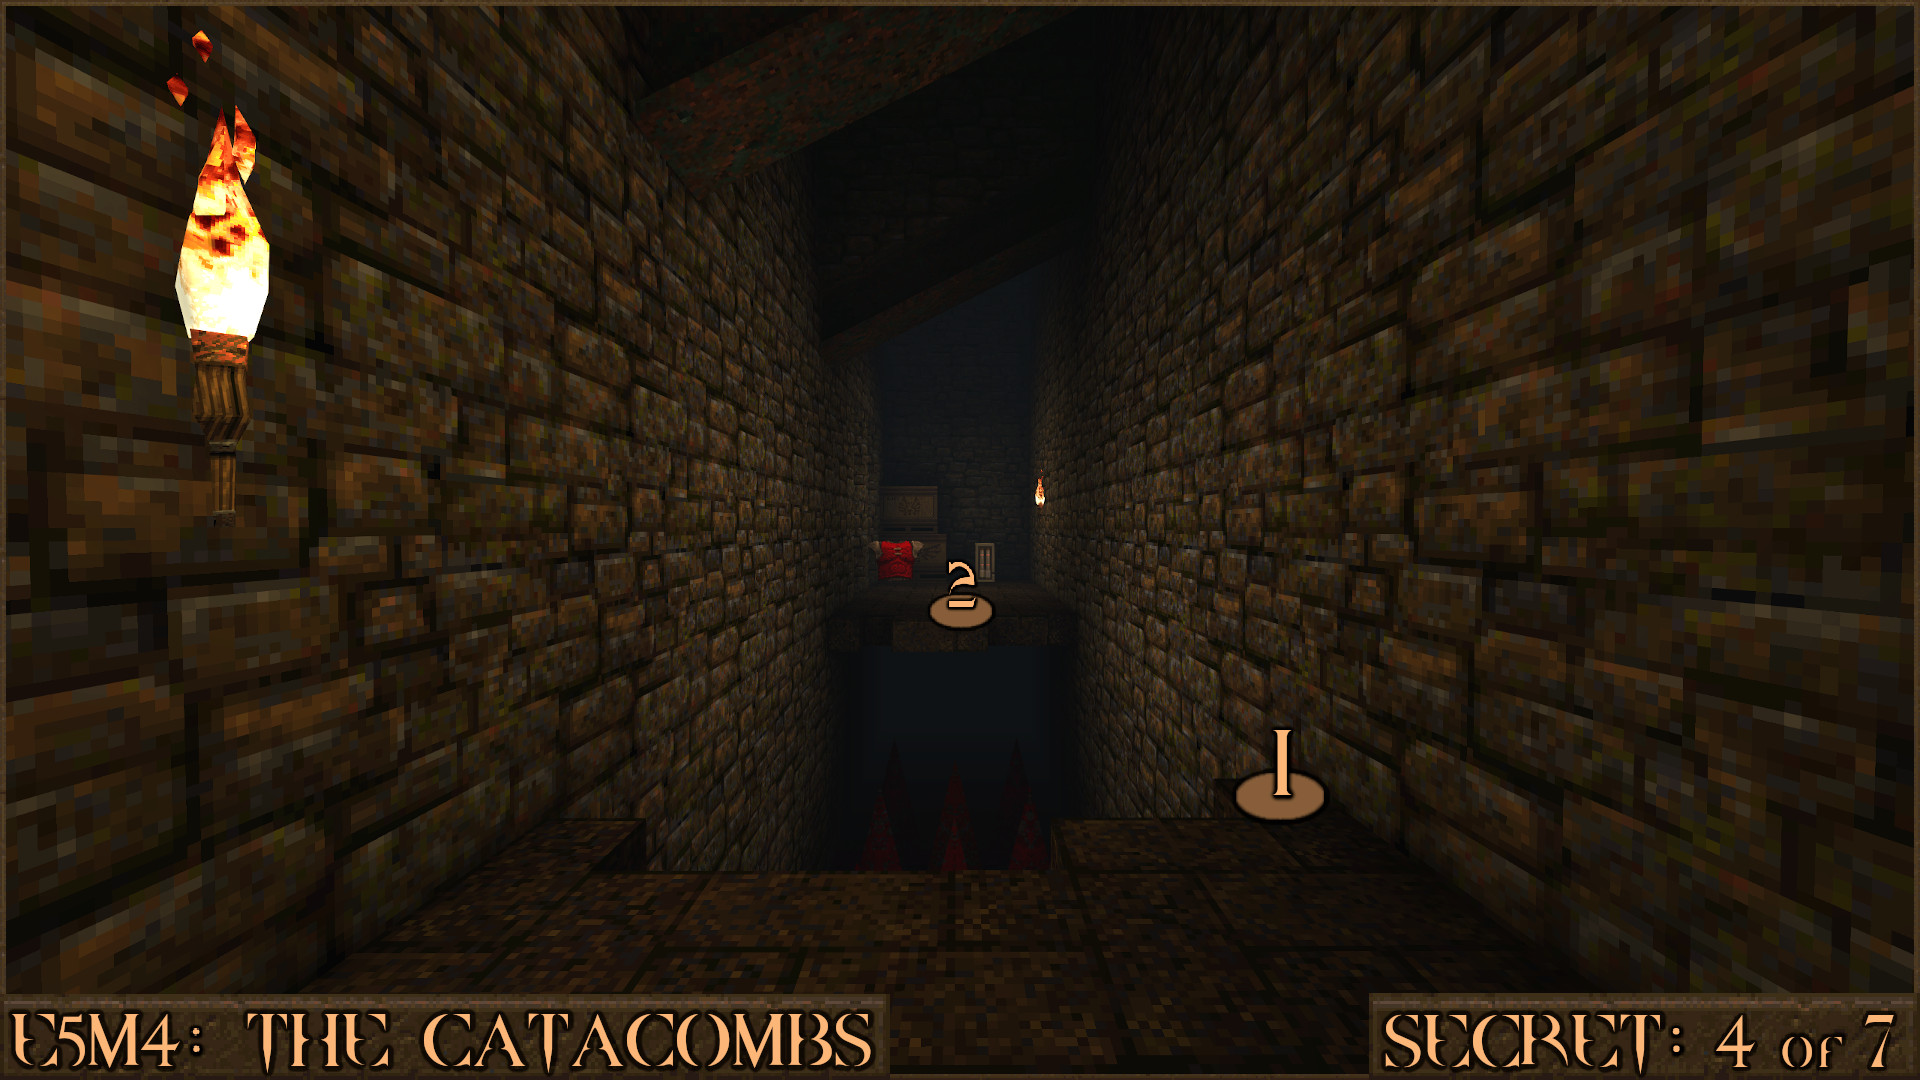 Quake Finding All Secrets in Quake Expansion pack: Dimension of the Past - E5M4: The Catacombs - 13E8A93